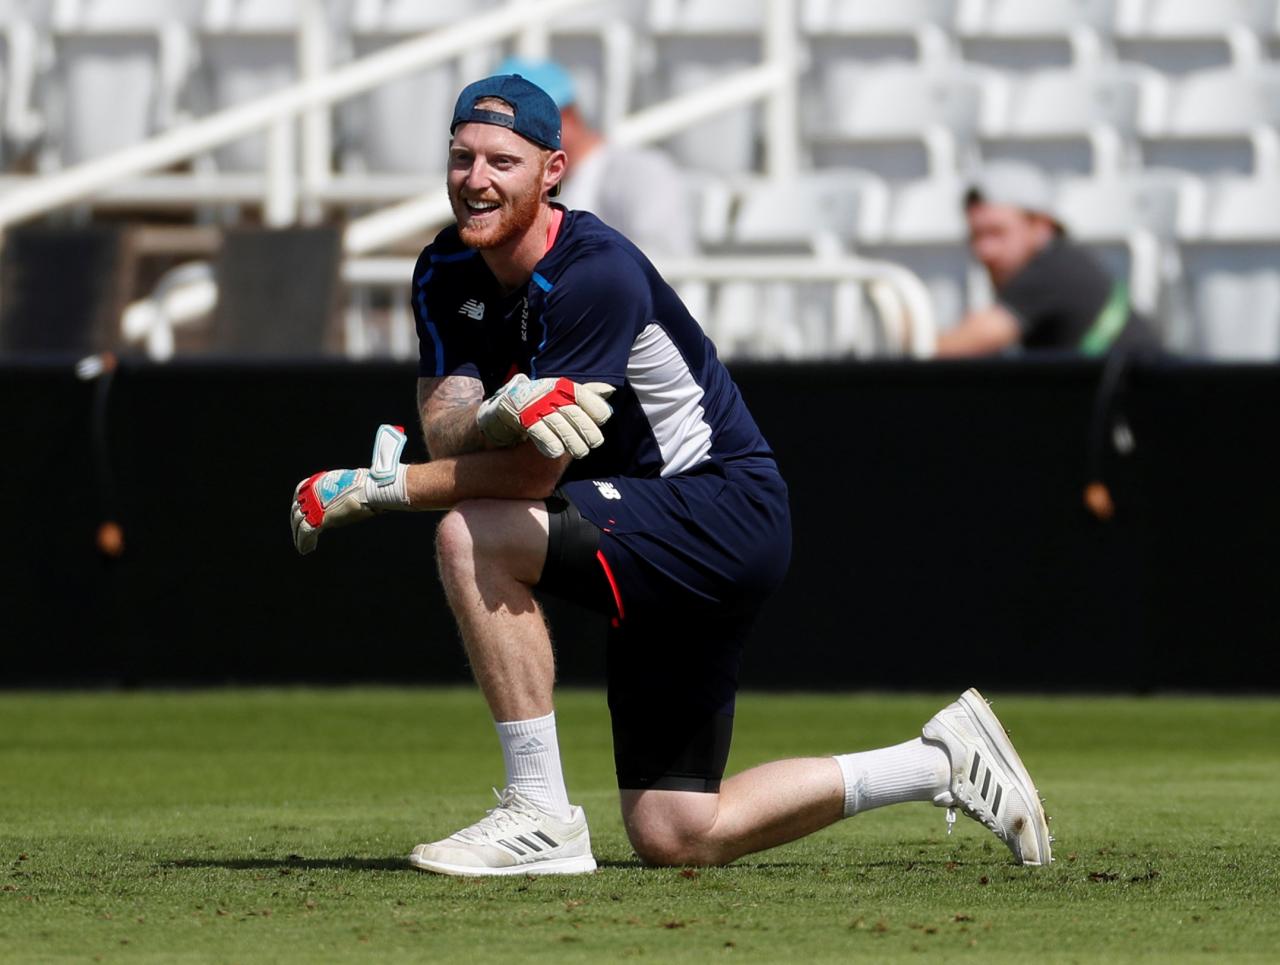 Stokes not an automatic choice for third Test: Bayliss